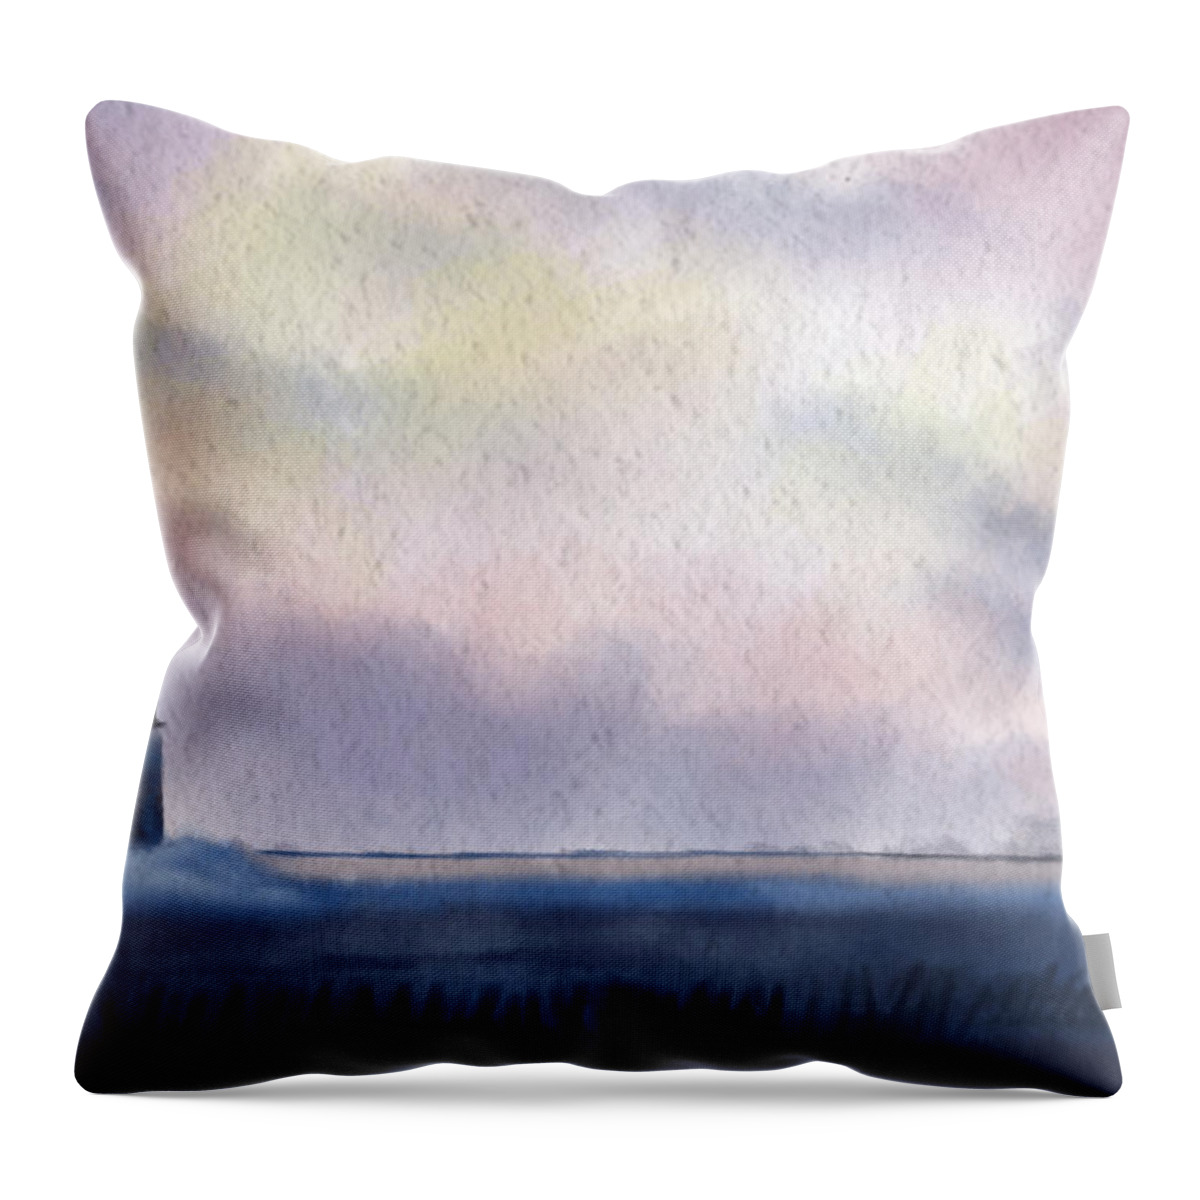 Lighthouse Throw Pillow featuring the digital art Lighthouse On The Lake by Michael Kallstrom